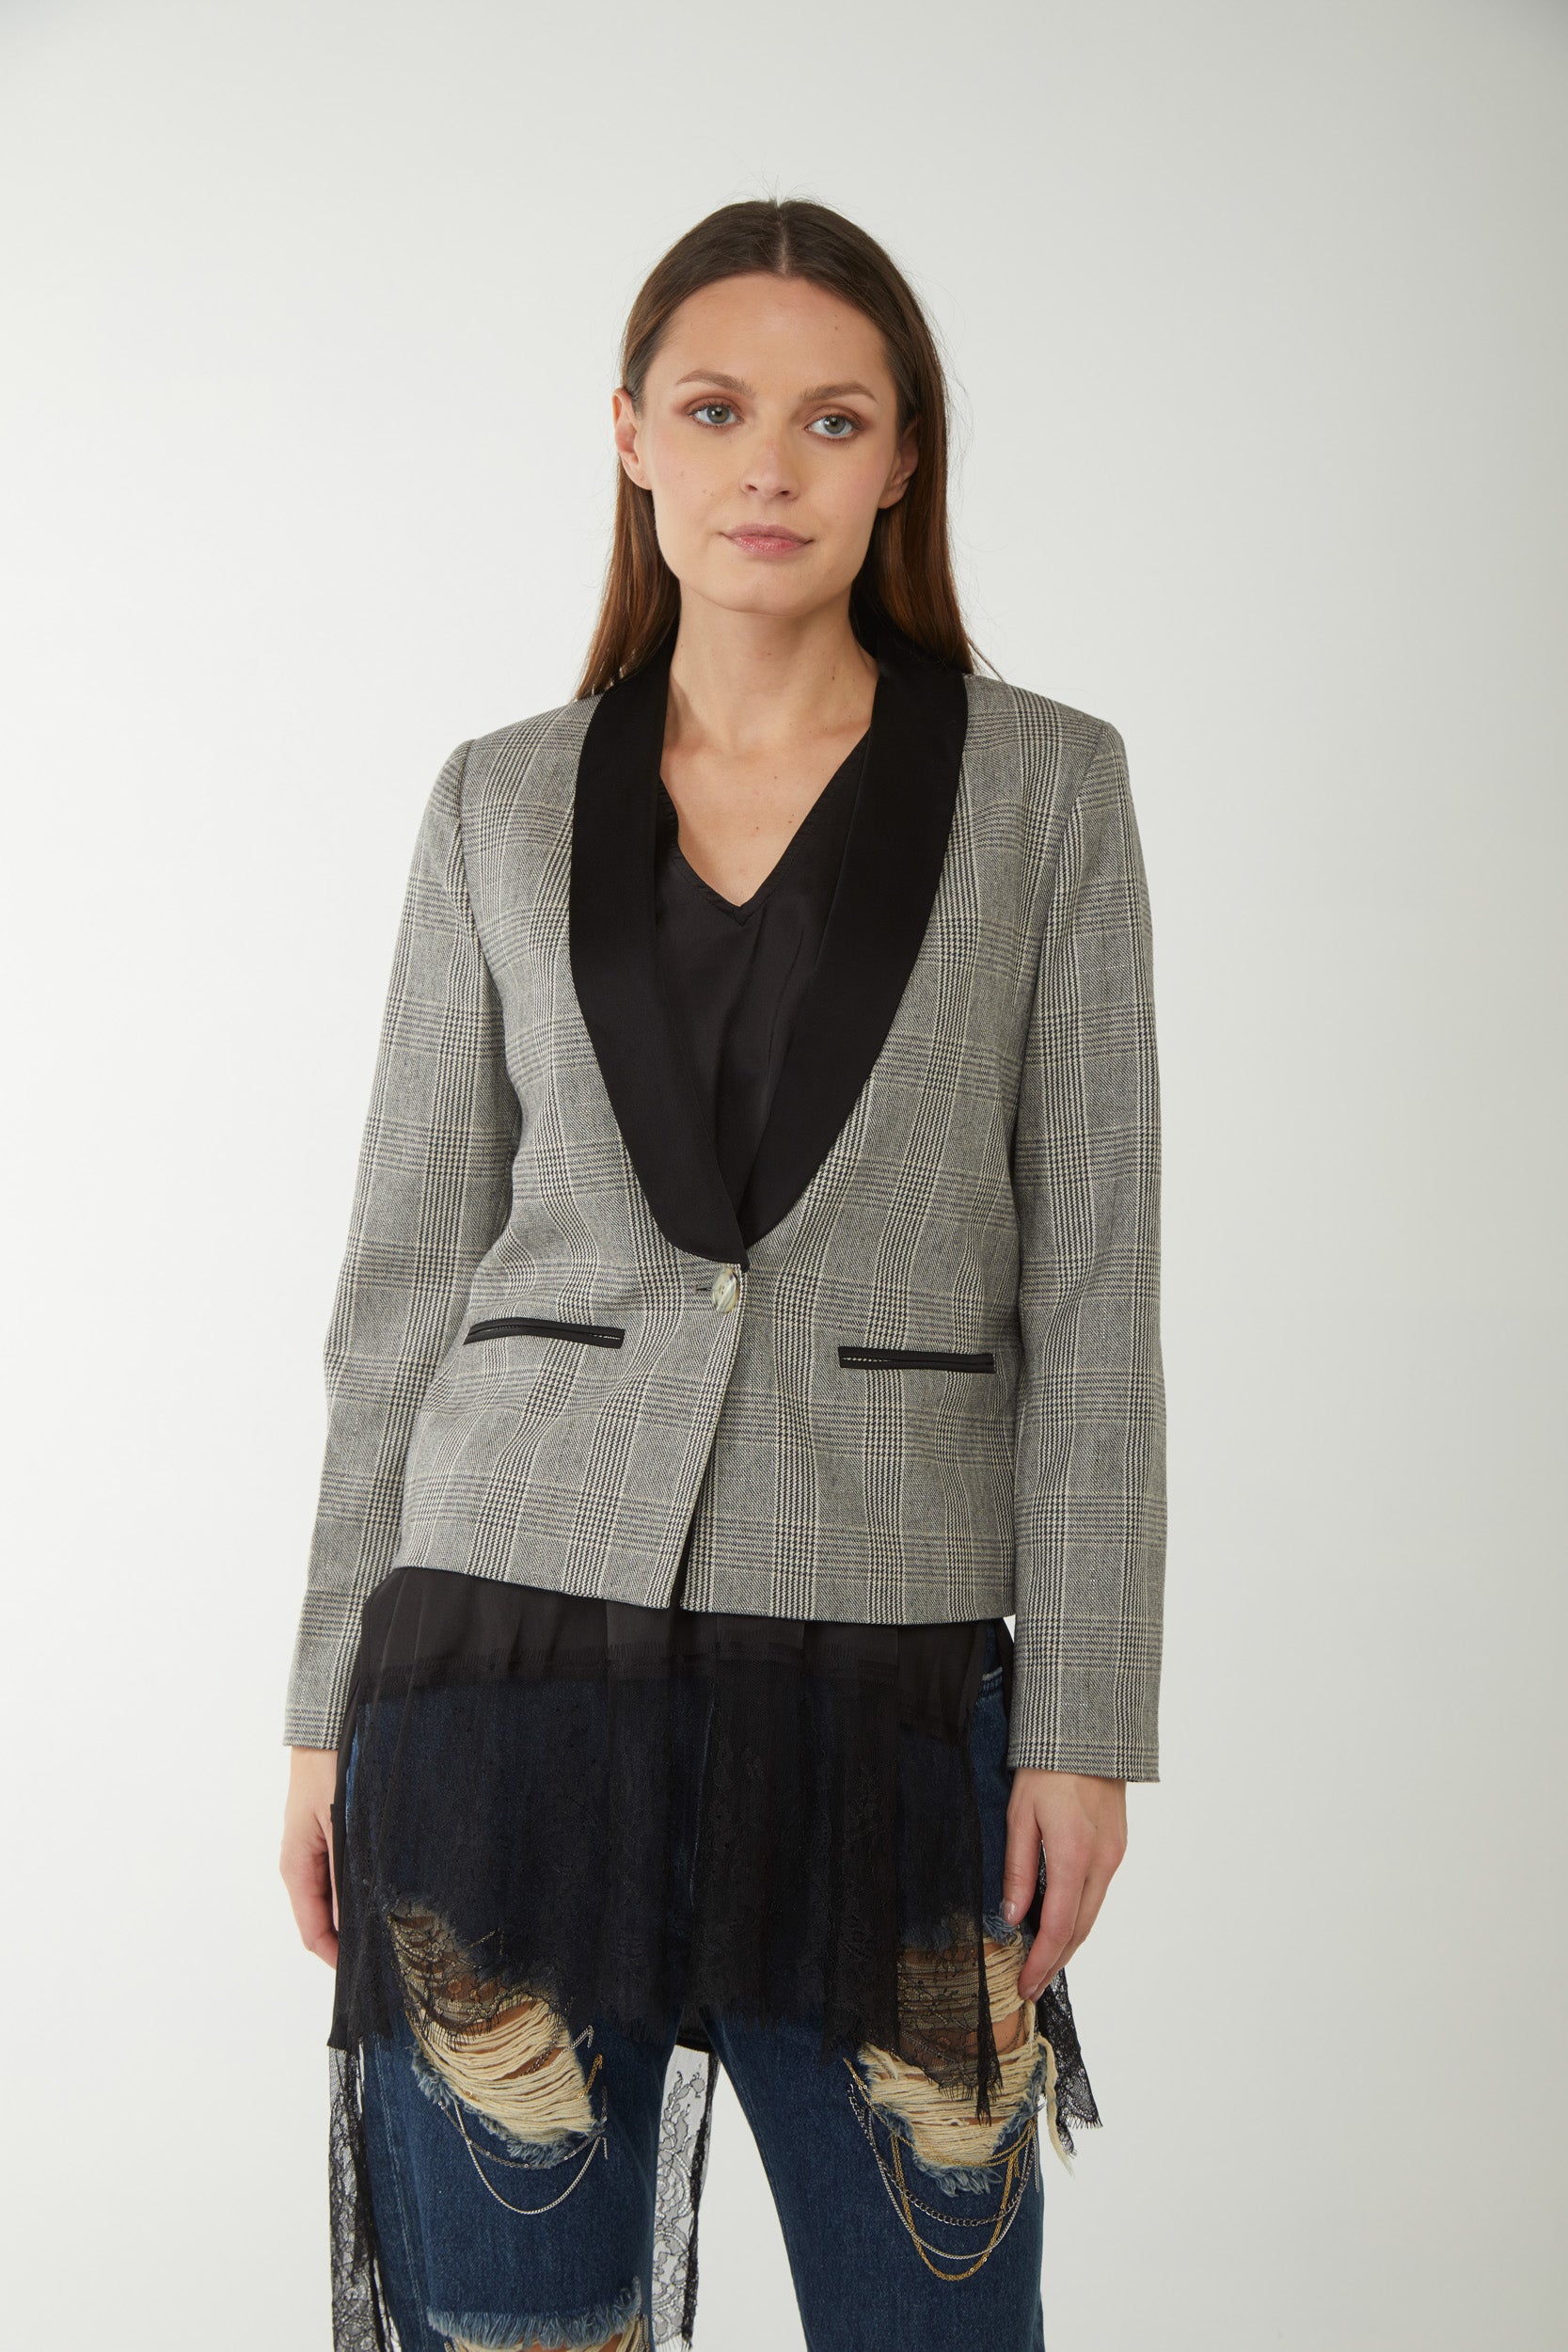 TWINSET Prince of Wales Single-Breasted Blazer